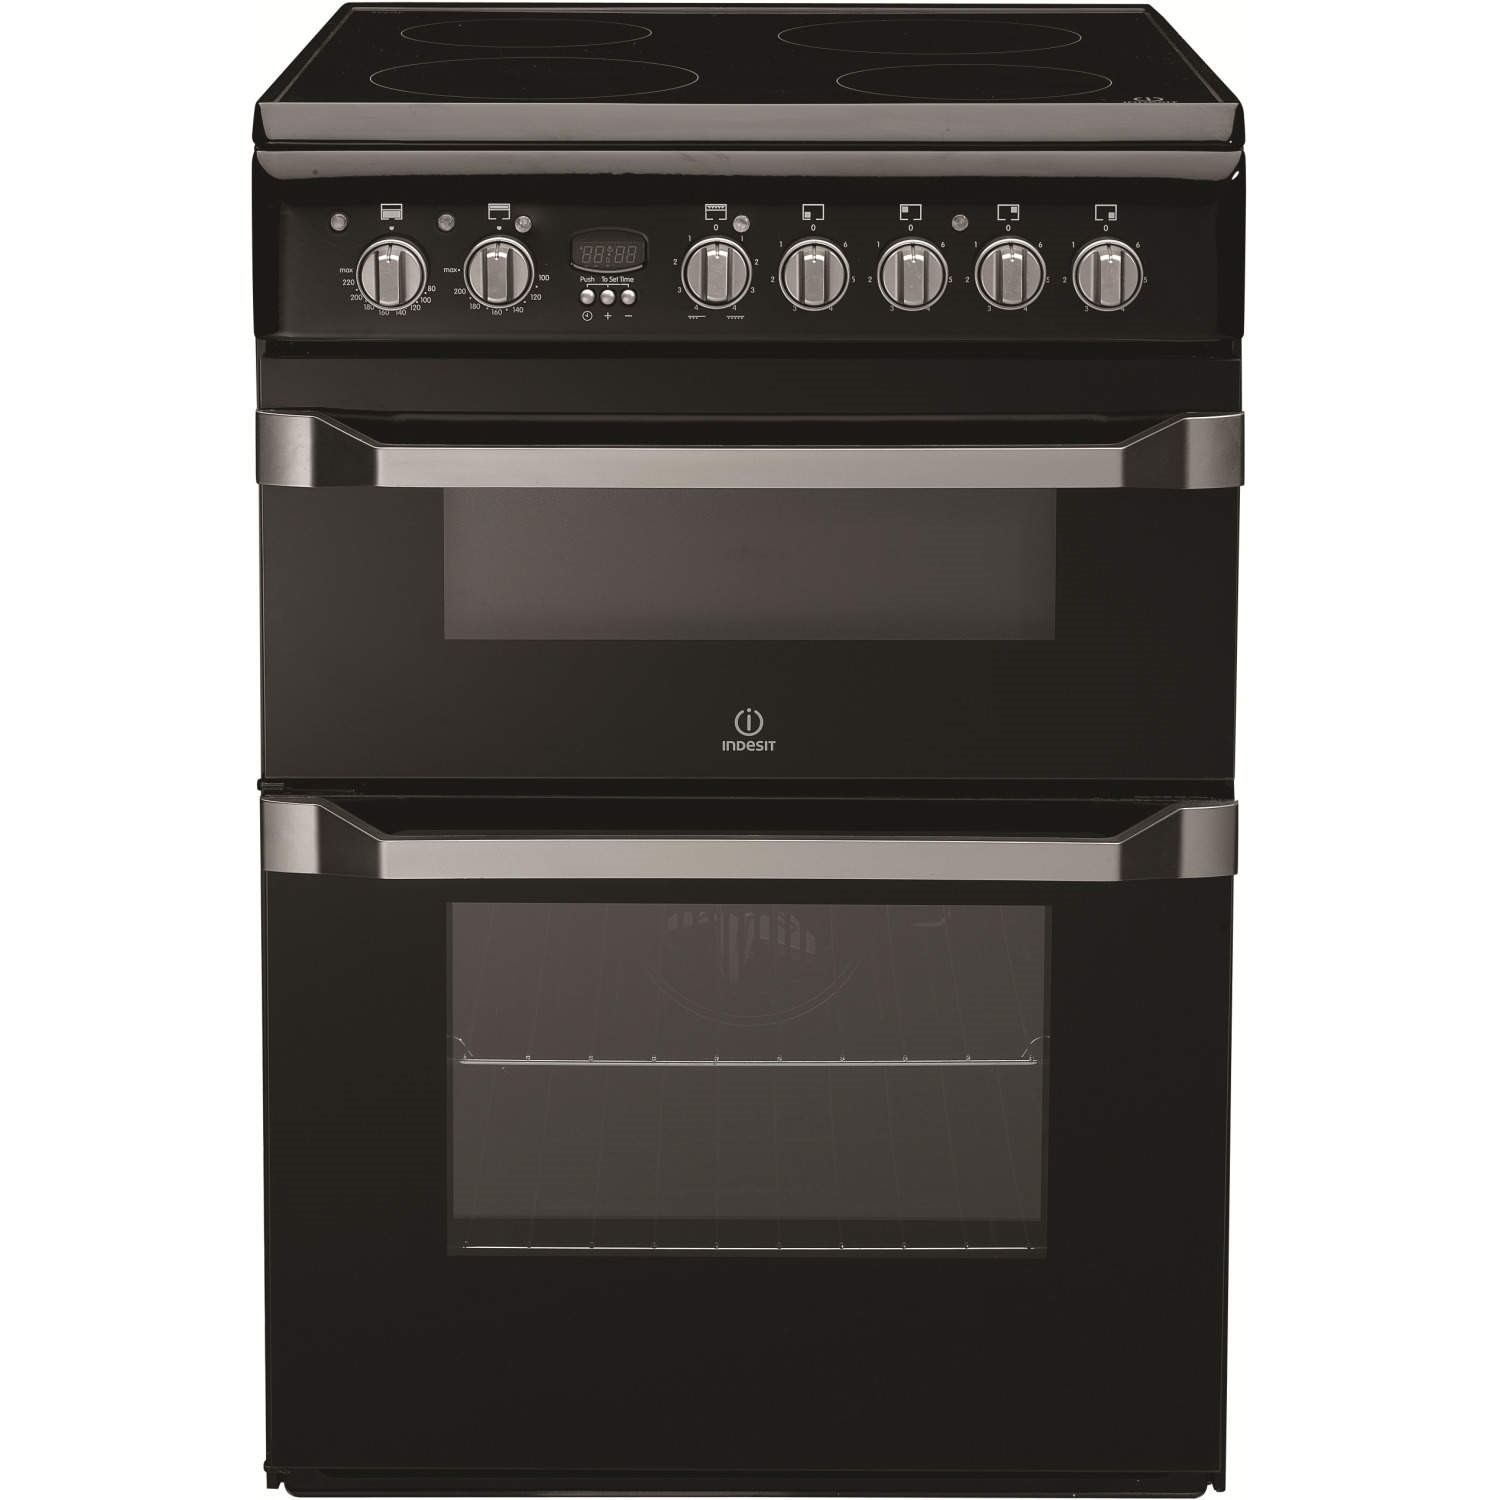 Indesit 60cm Double Oven Electric Cooker with Ceramic Hob - Black